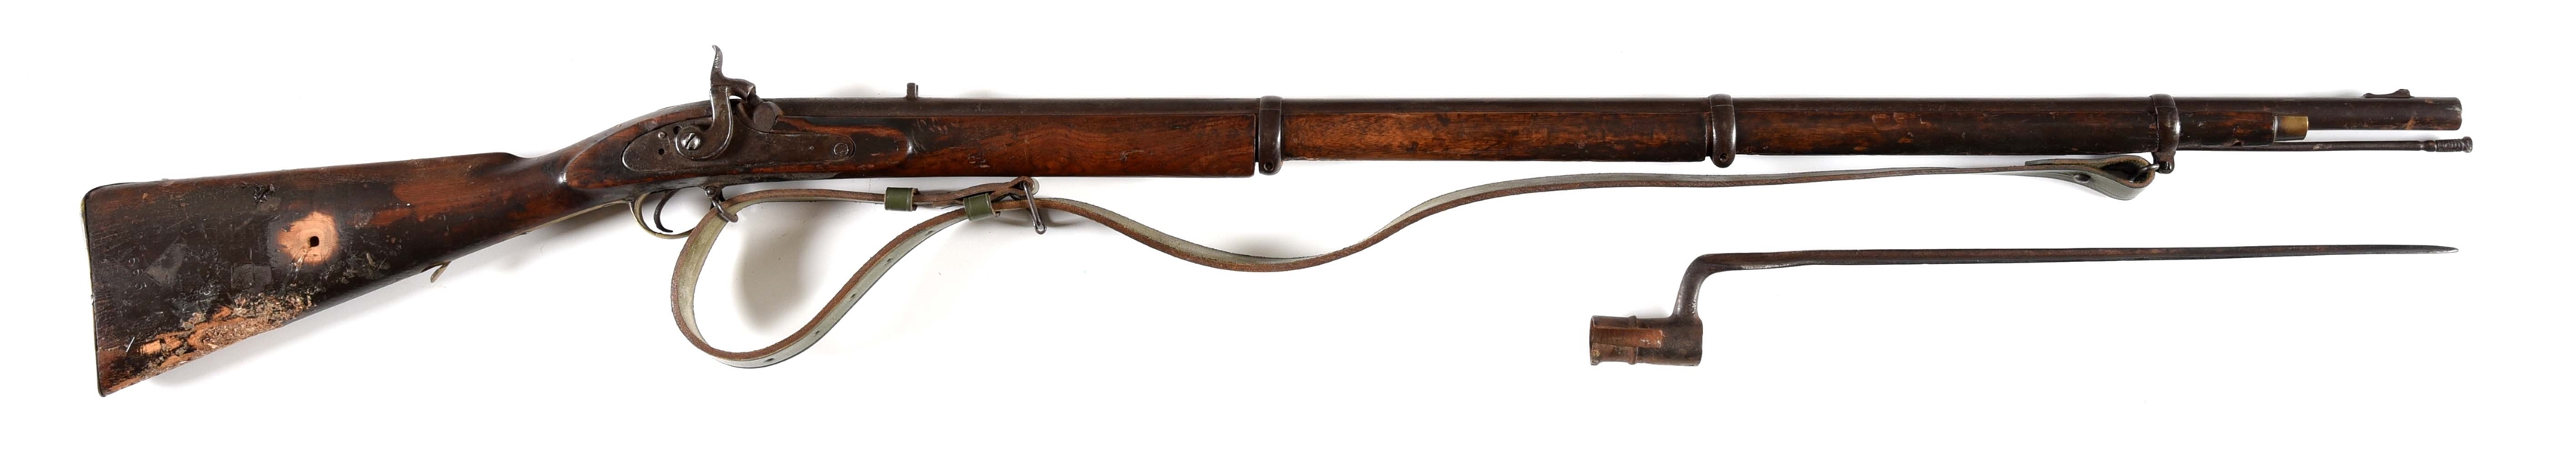 (A) UNMARKED PERCUSSION RIFLE WITH BAYONET.